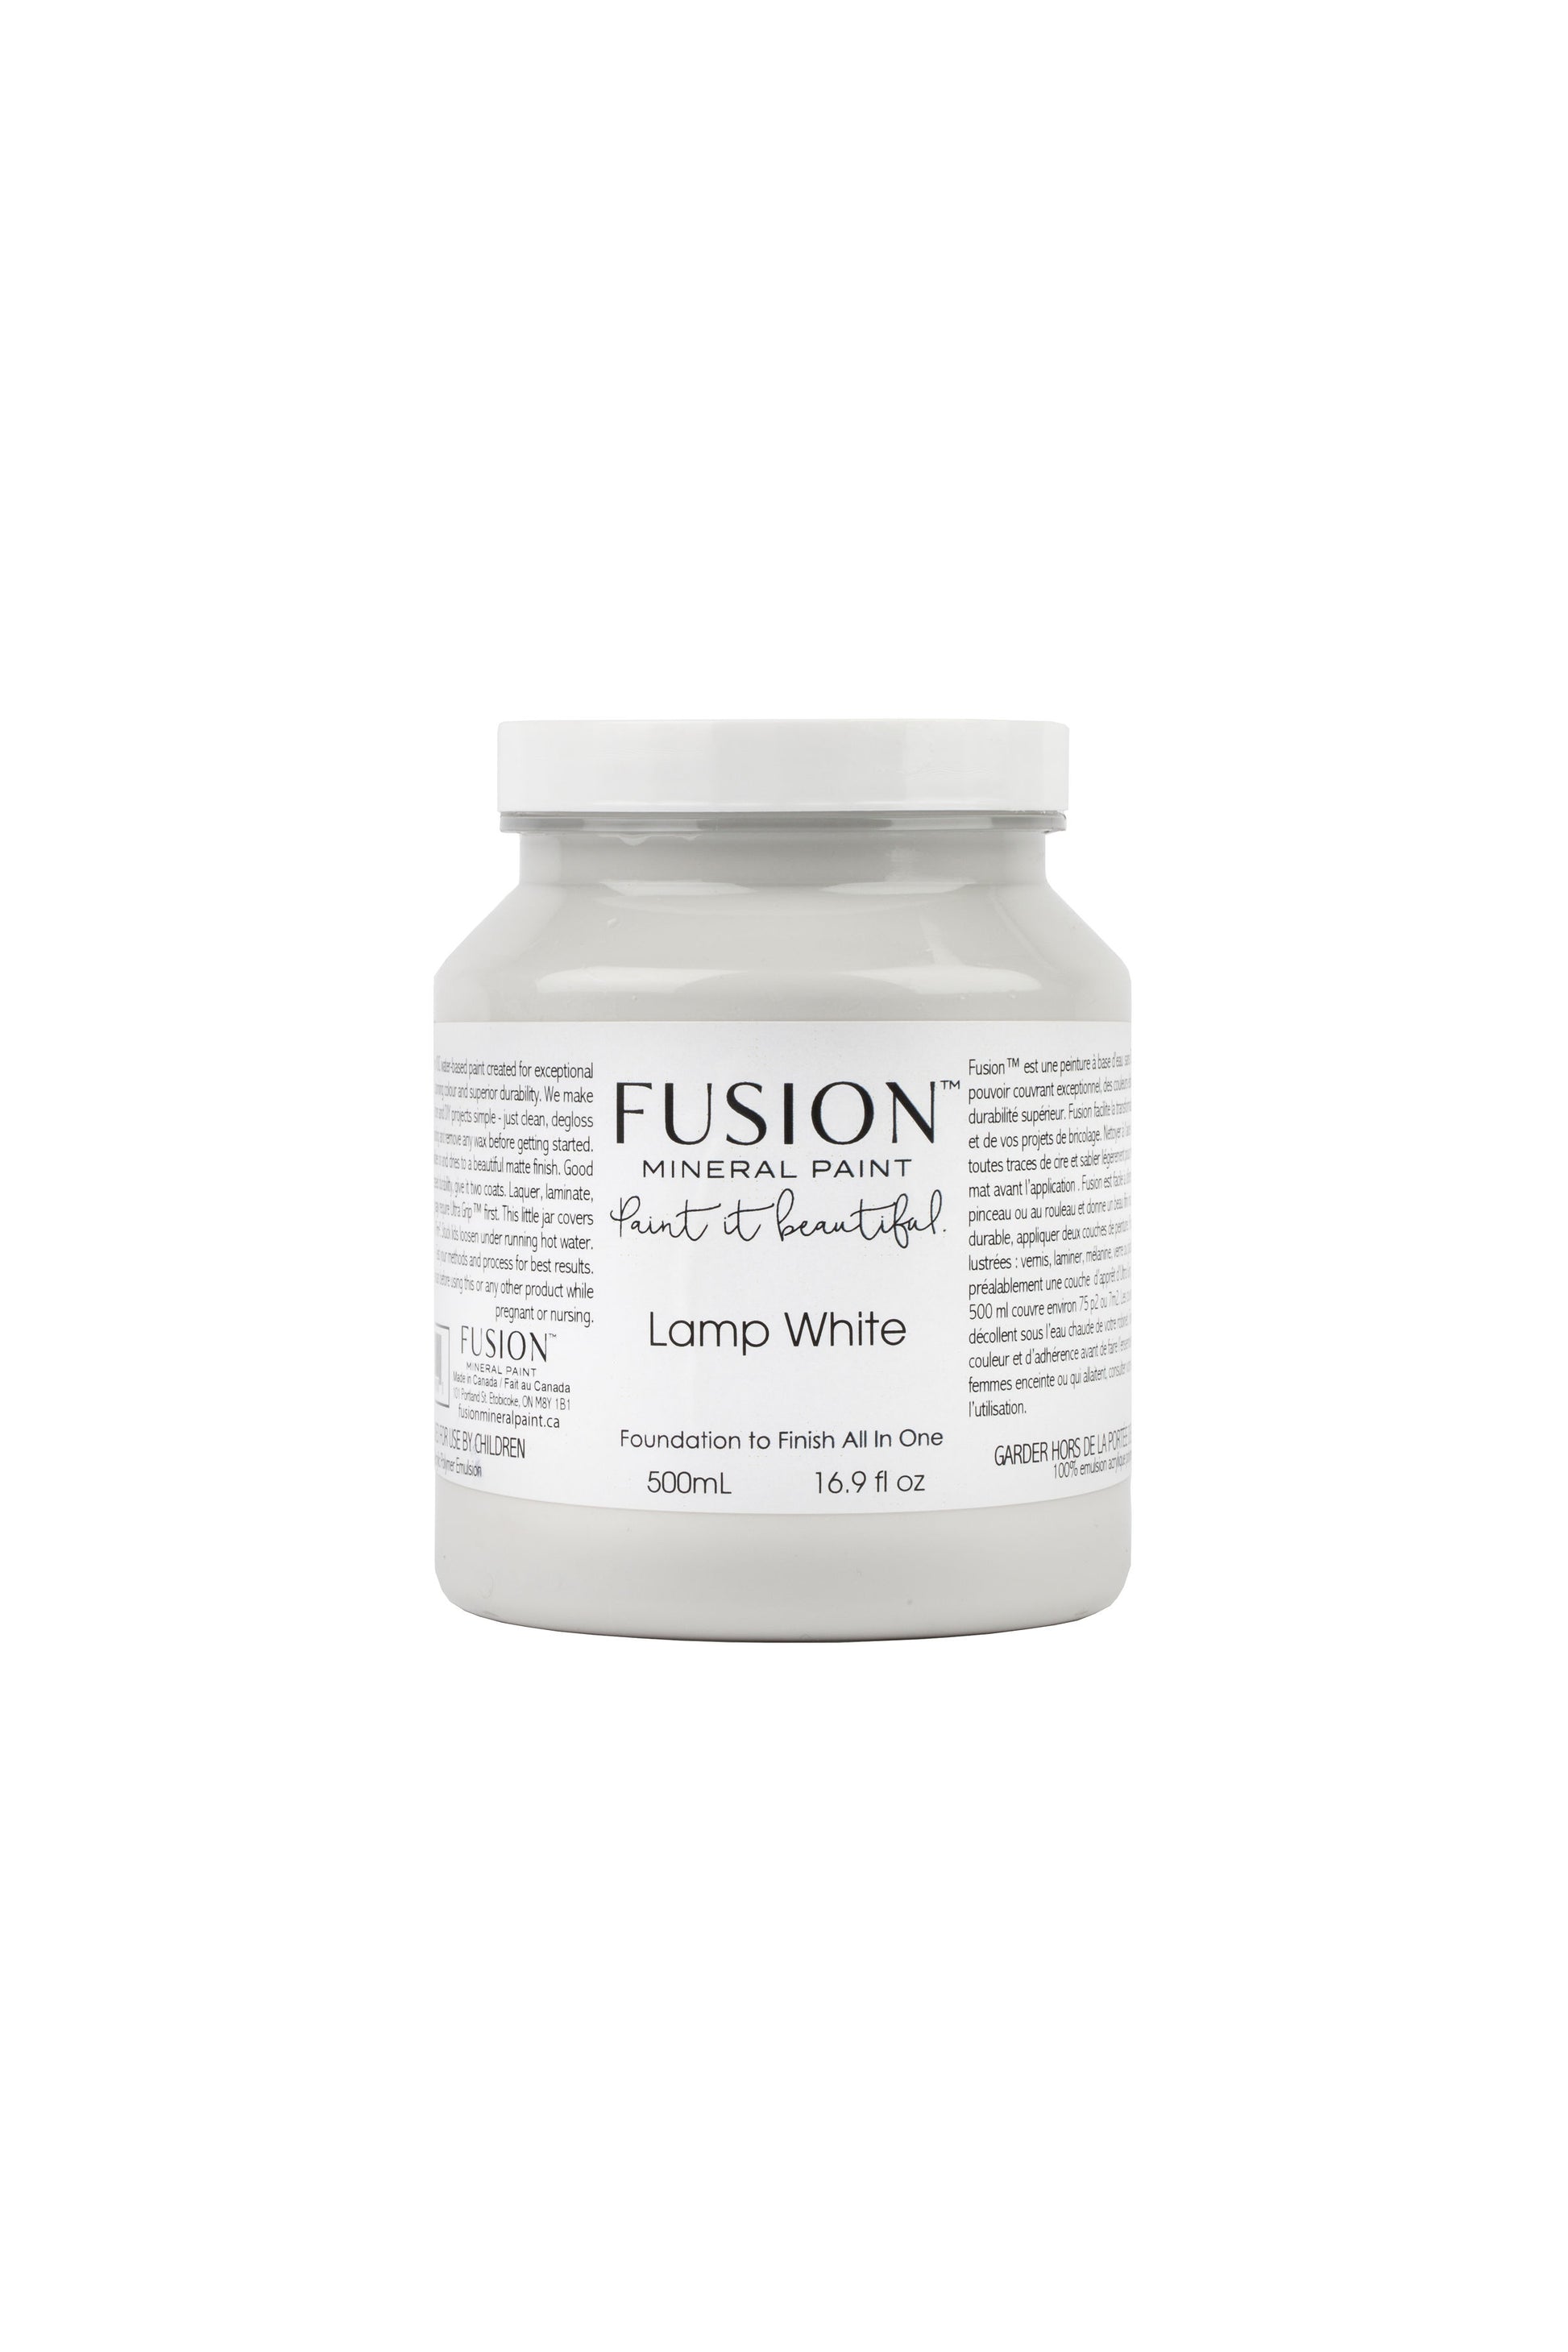 Lamp White Fusion Mineral Paint, Grey-White Paint Color| 500ml Pint Size